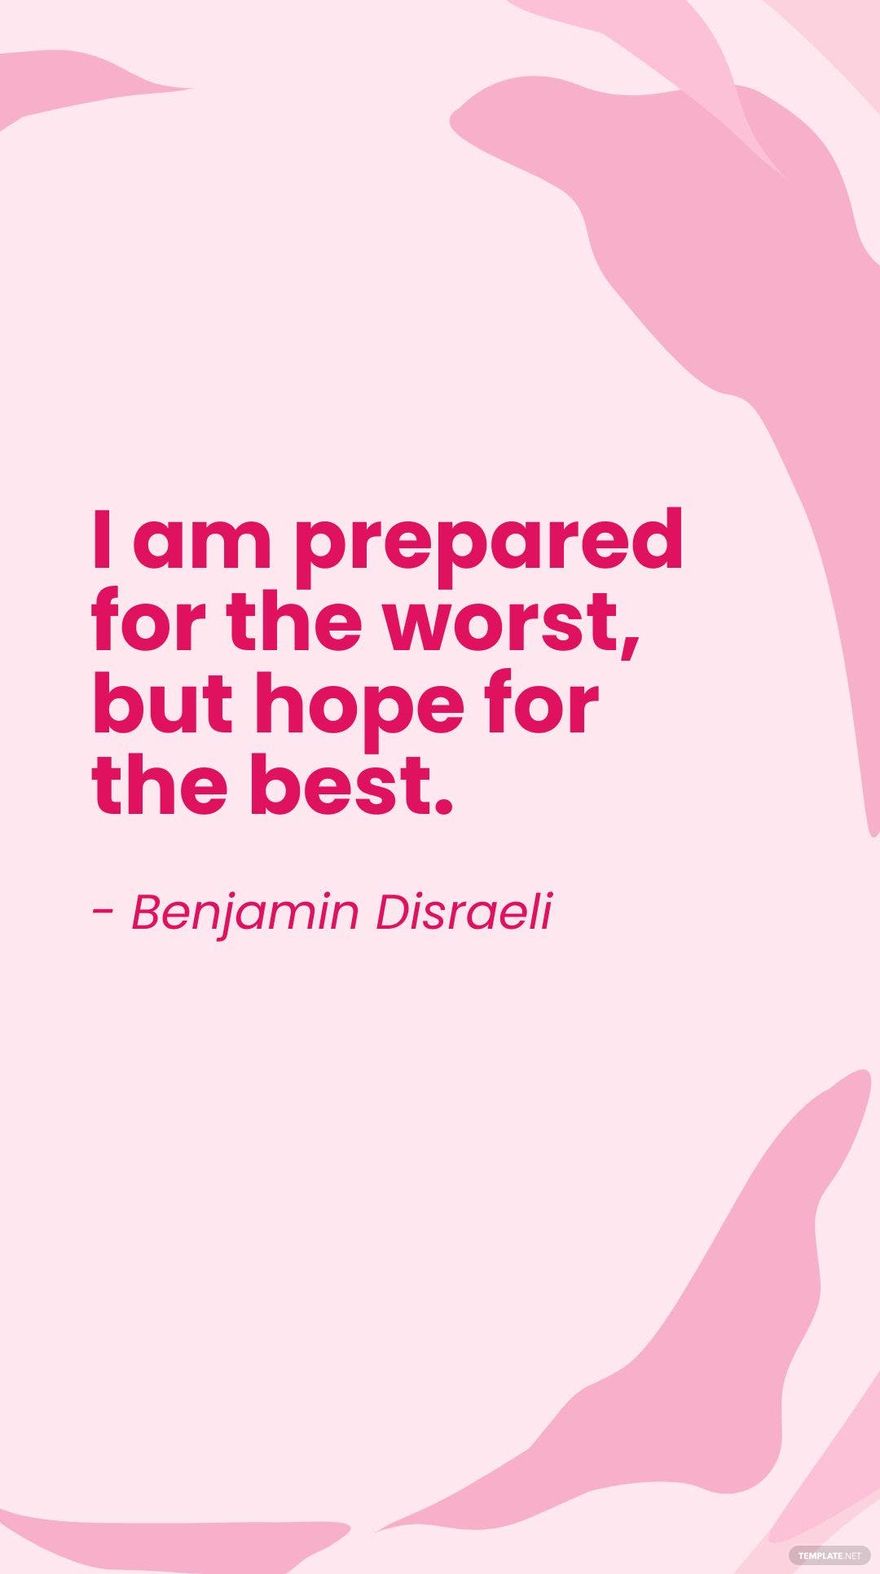 Free Benjamin Disraeli - I am prepared for the worst, but hope for the best. in JPG